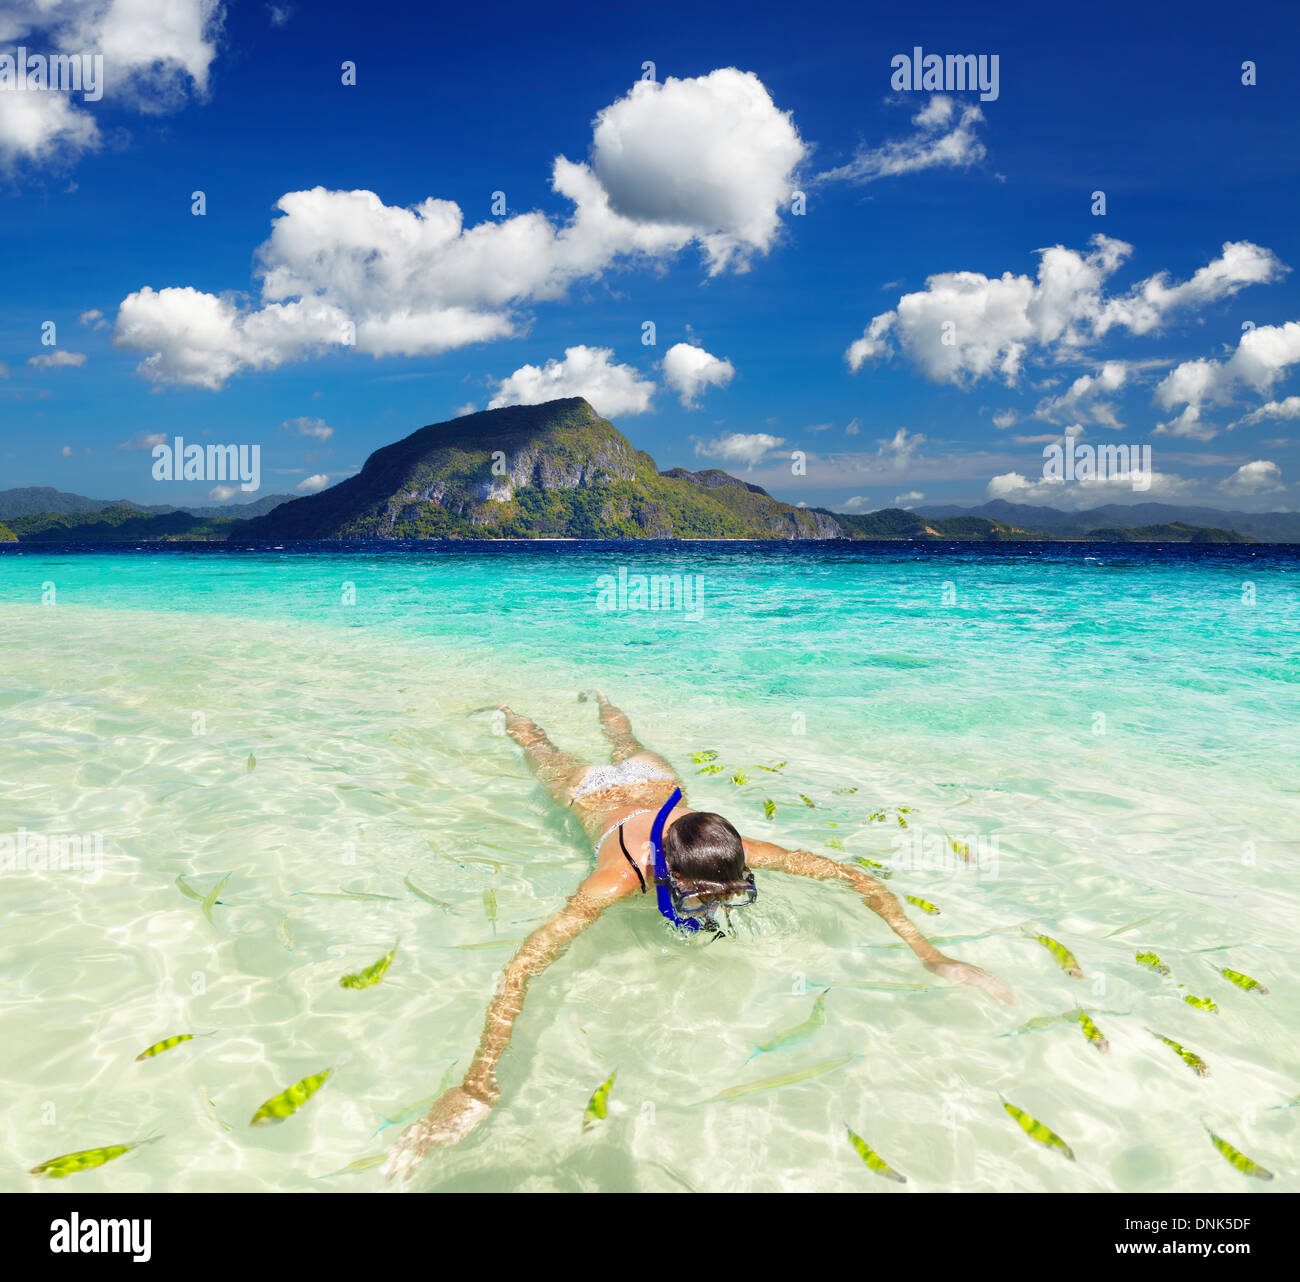 Tropical beach, woman swimming with snorkel Stock Photo